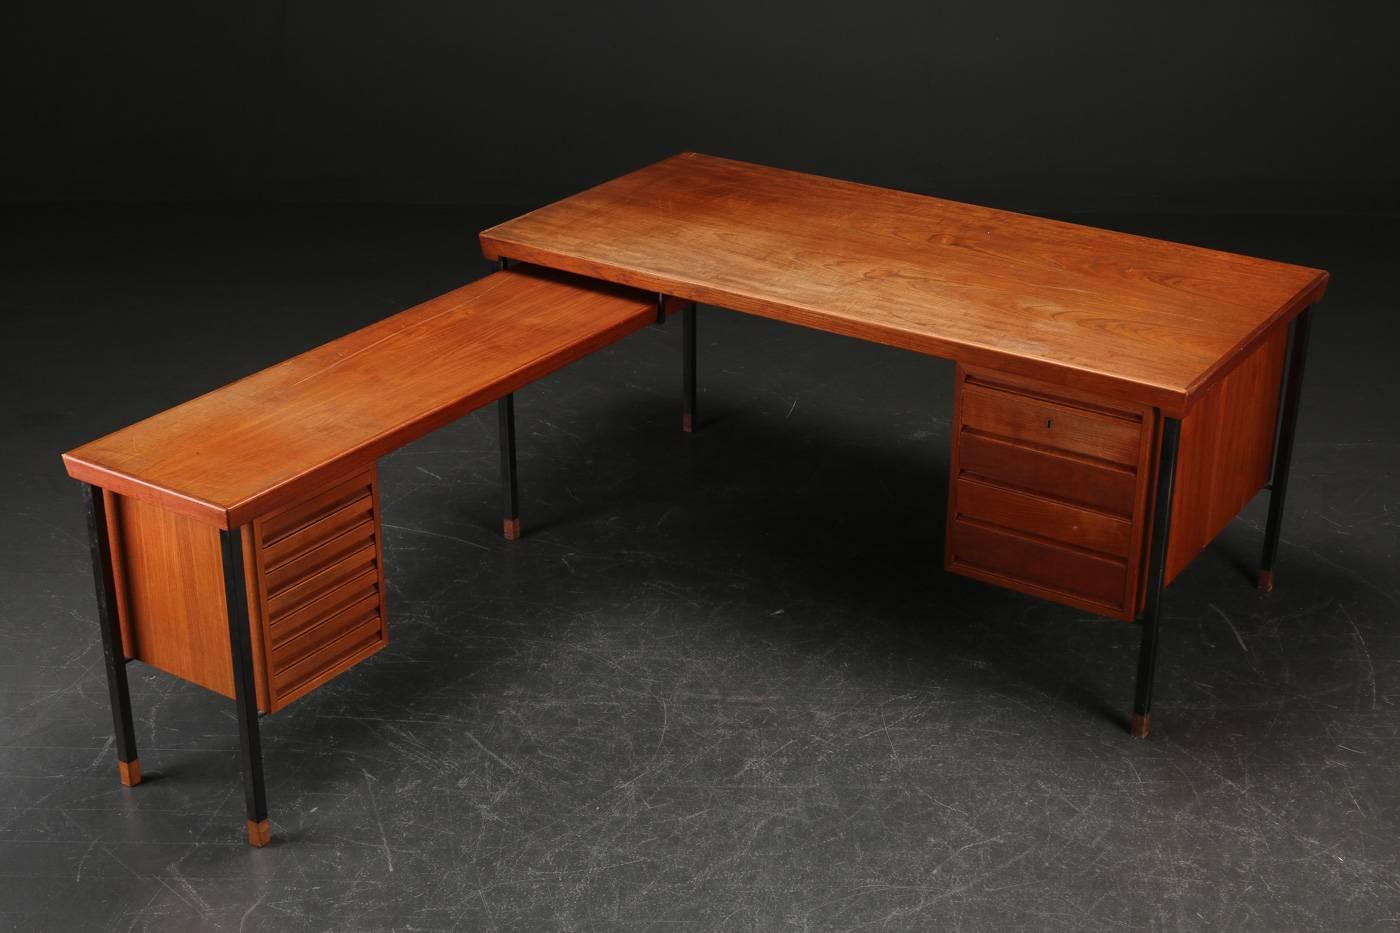 This desk was designed by Danish design duo Peter Hvidt and Orla Mølgaard Nielsen for Søborg Møbelfabrik. The modern desk has a minimalistic form and the rectangular tops are supported by a steel frame with solid teak foot caps. This piece can be